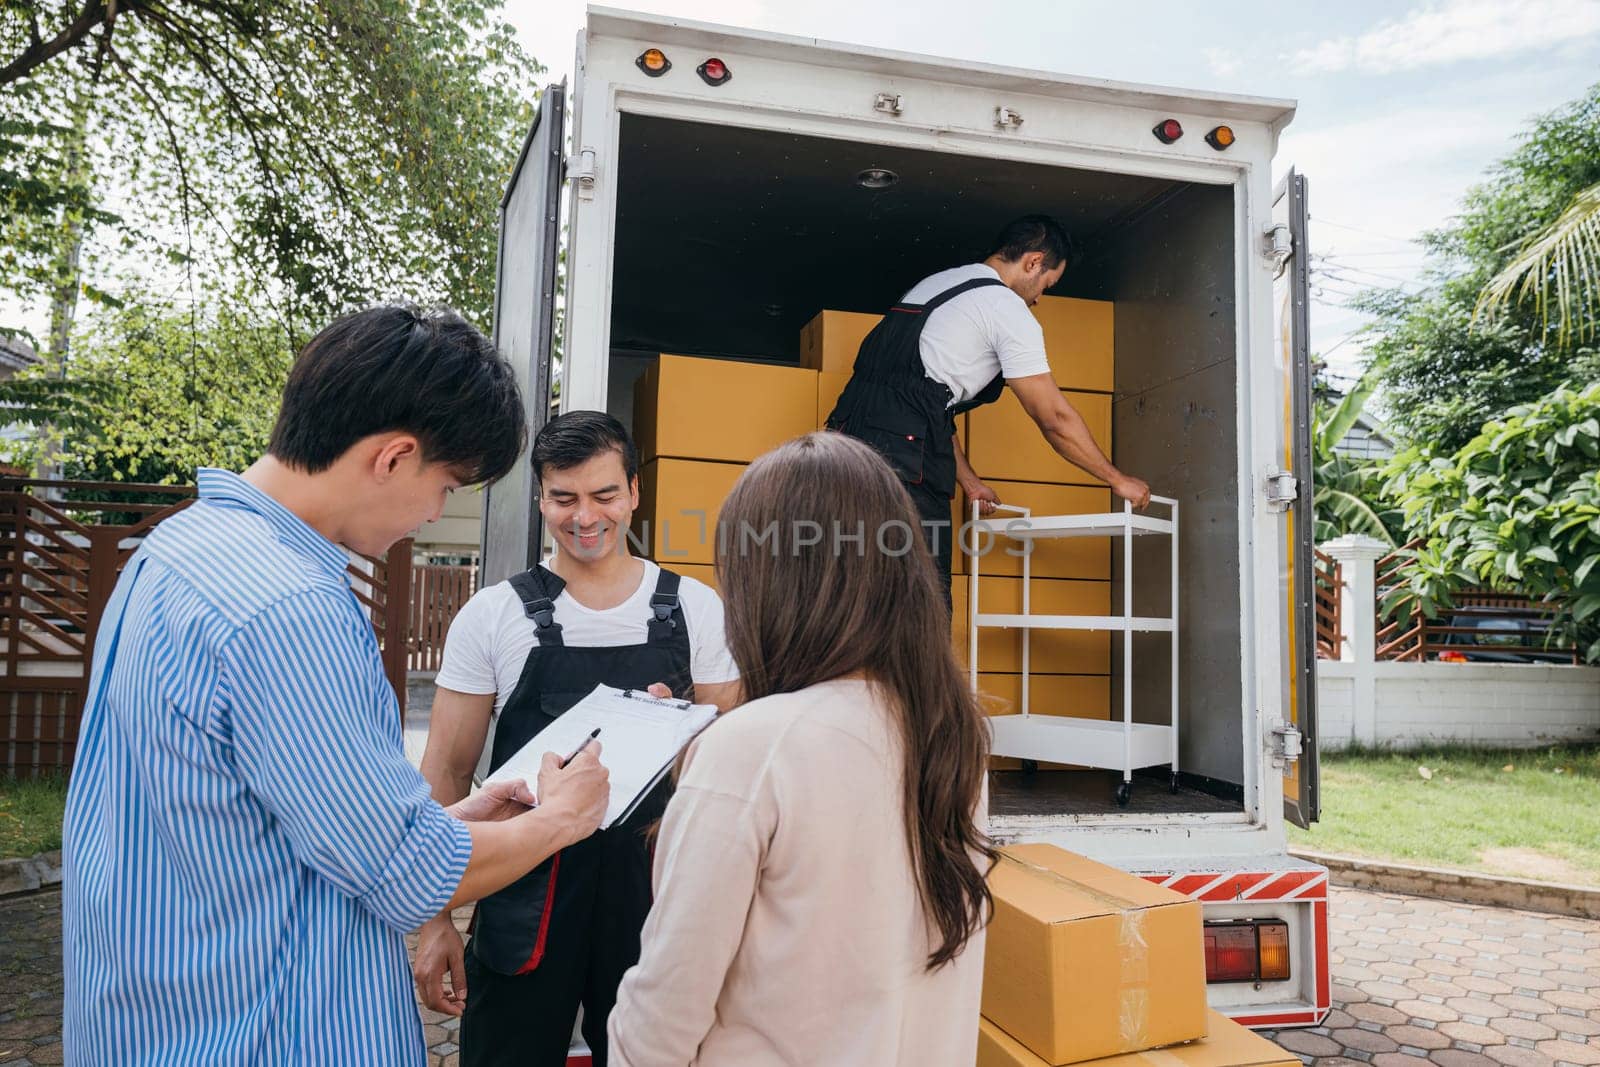 Professional movers assist a satisfied couple in signing the delivery checklist post-furniture handling. Uniformed employees prioritize customer happiness and satisfaction. Moving Day Concept